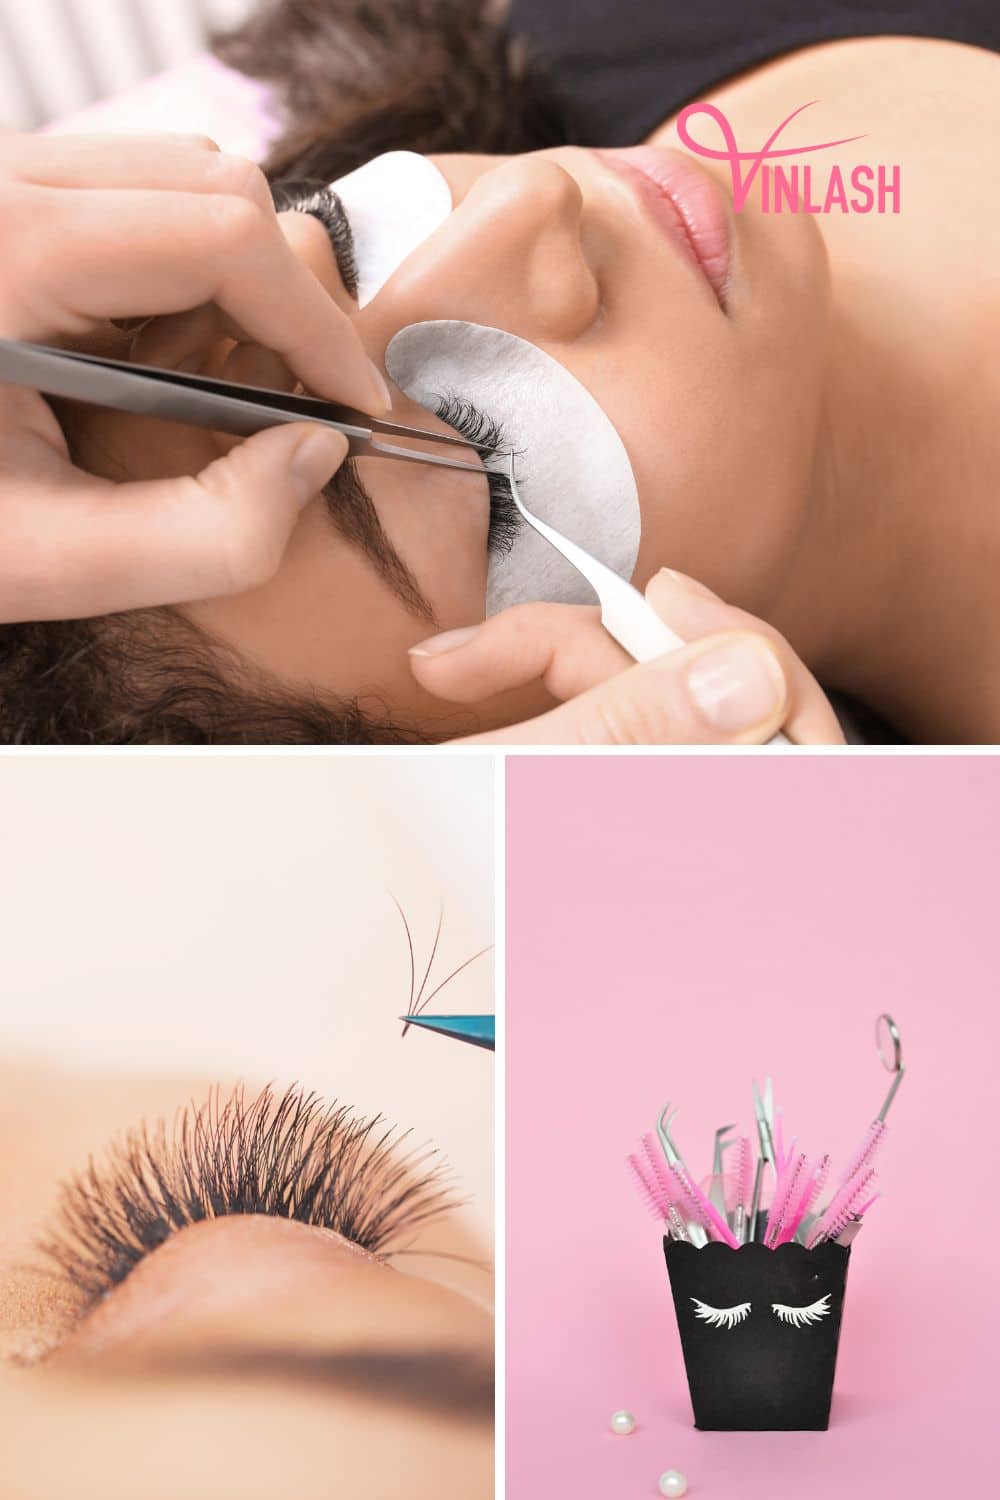 comprehensive-guide-to-choosing-a-lash-packaging-vendor-for-your-lash-business-6